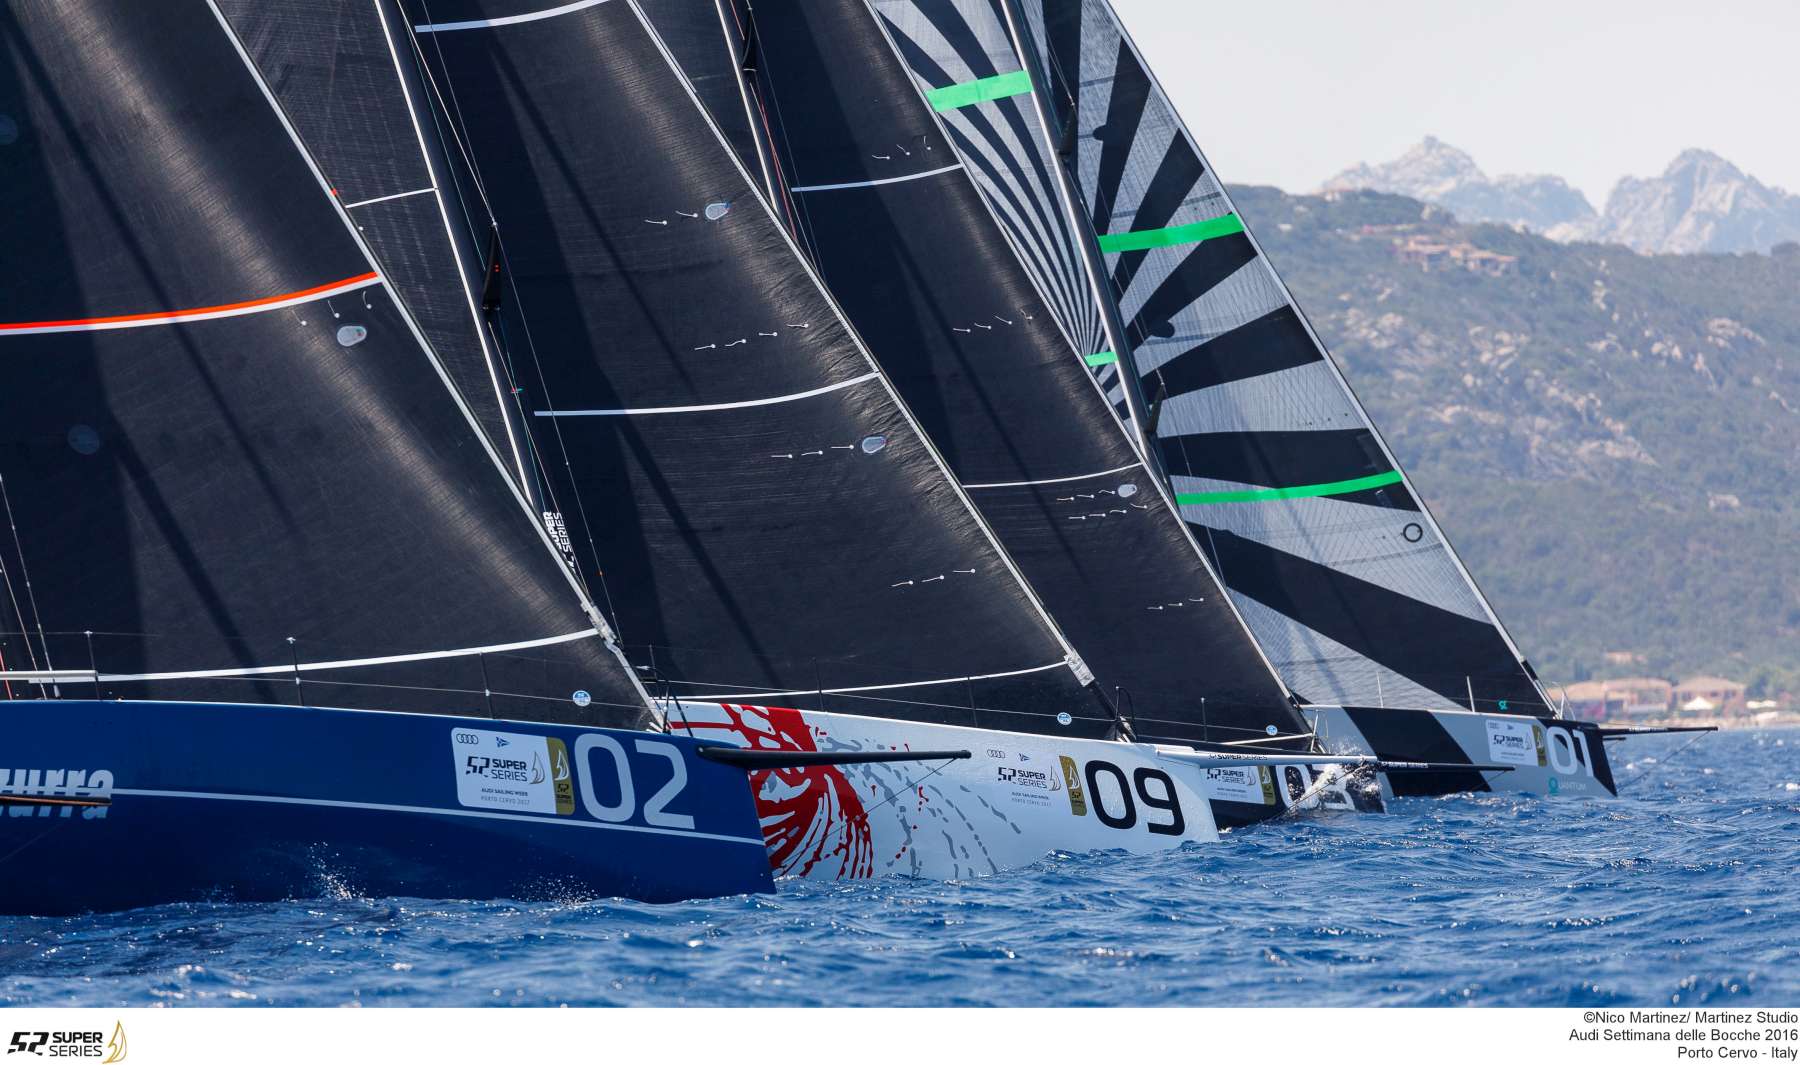 Audi Sailing Week, 52 Super Series - Images race Day 4 online - NEWS - Yacht Club Costa Smeralda